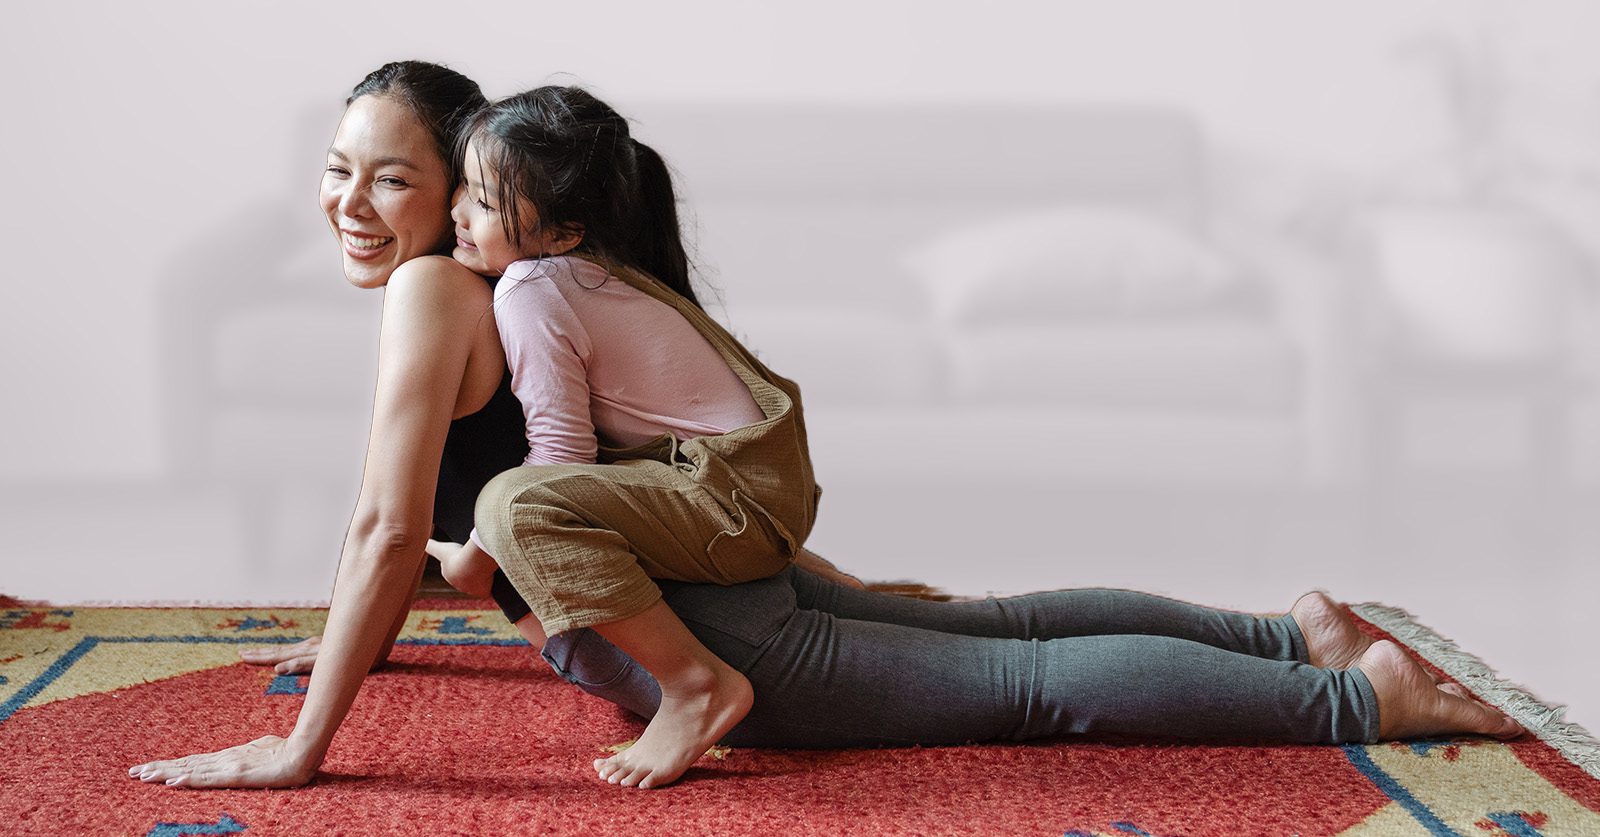 self care tips for busy moms: move your body